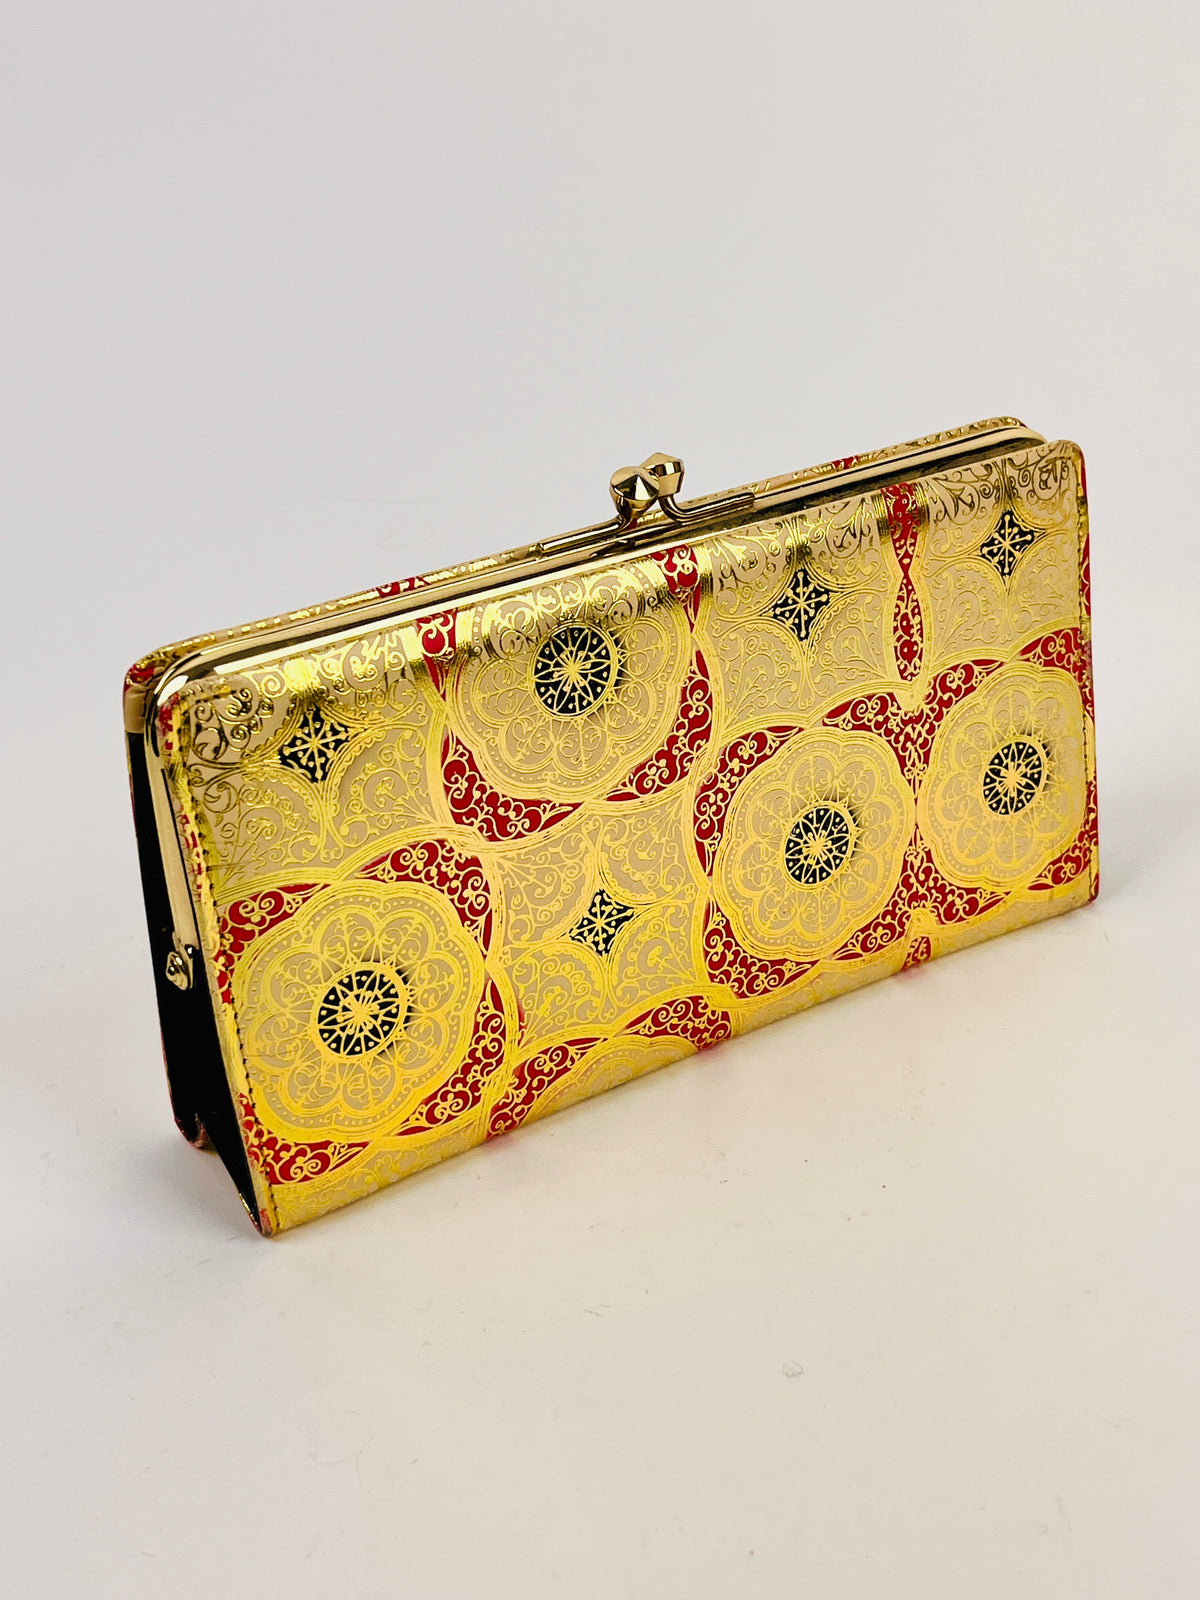 1960s Gold Embossed Leather Clutch